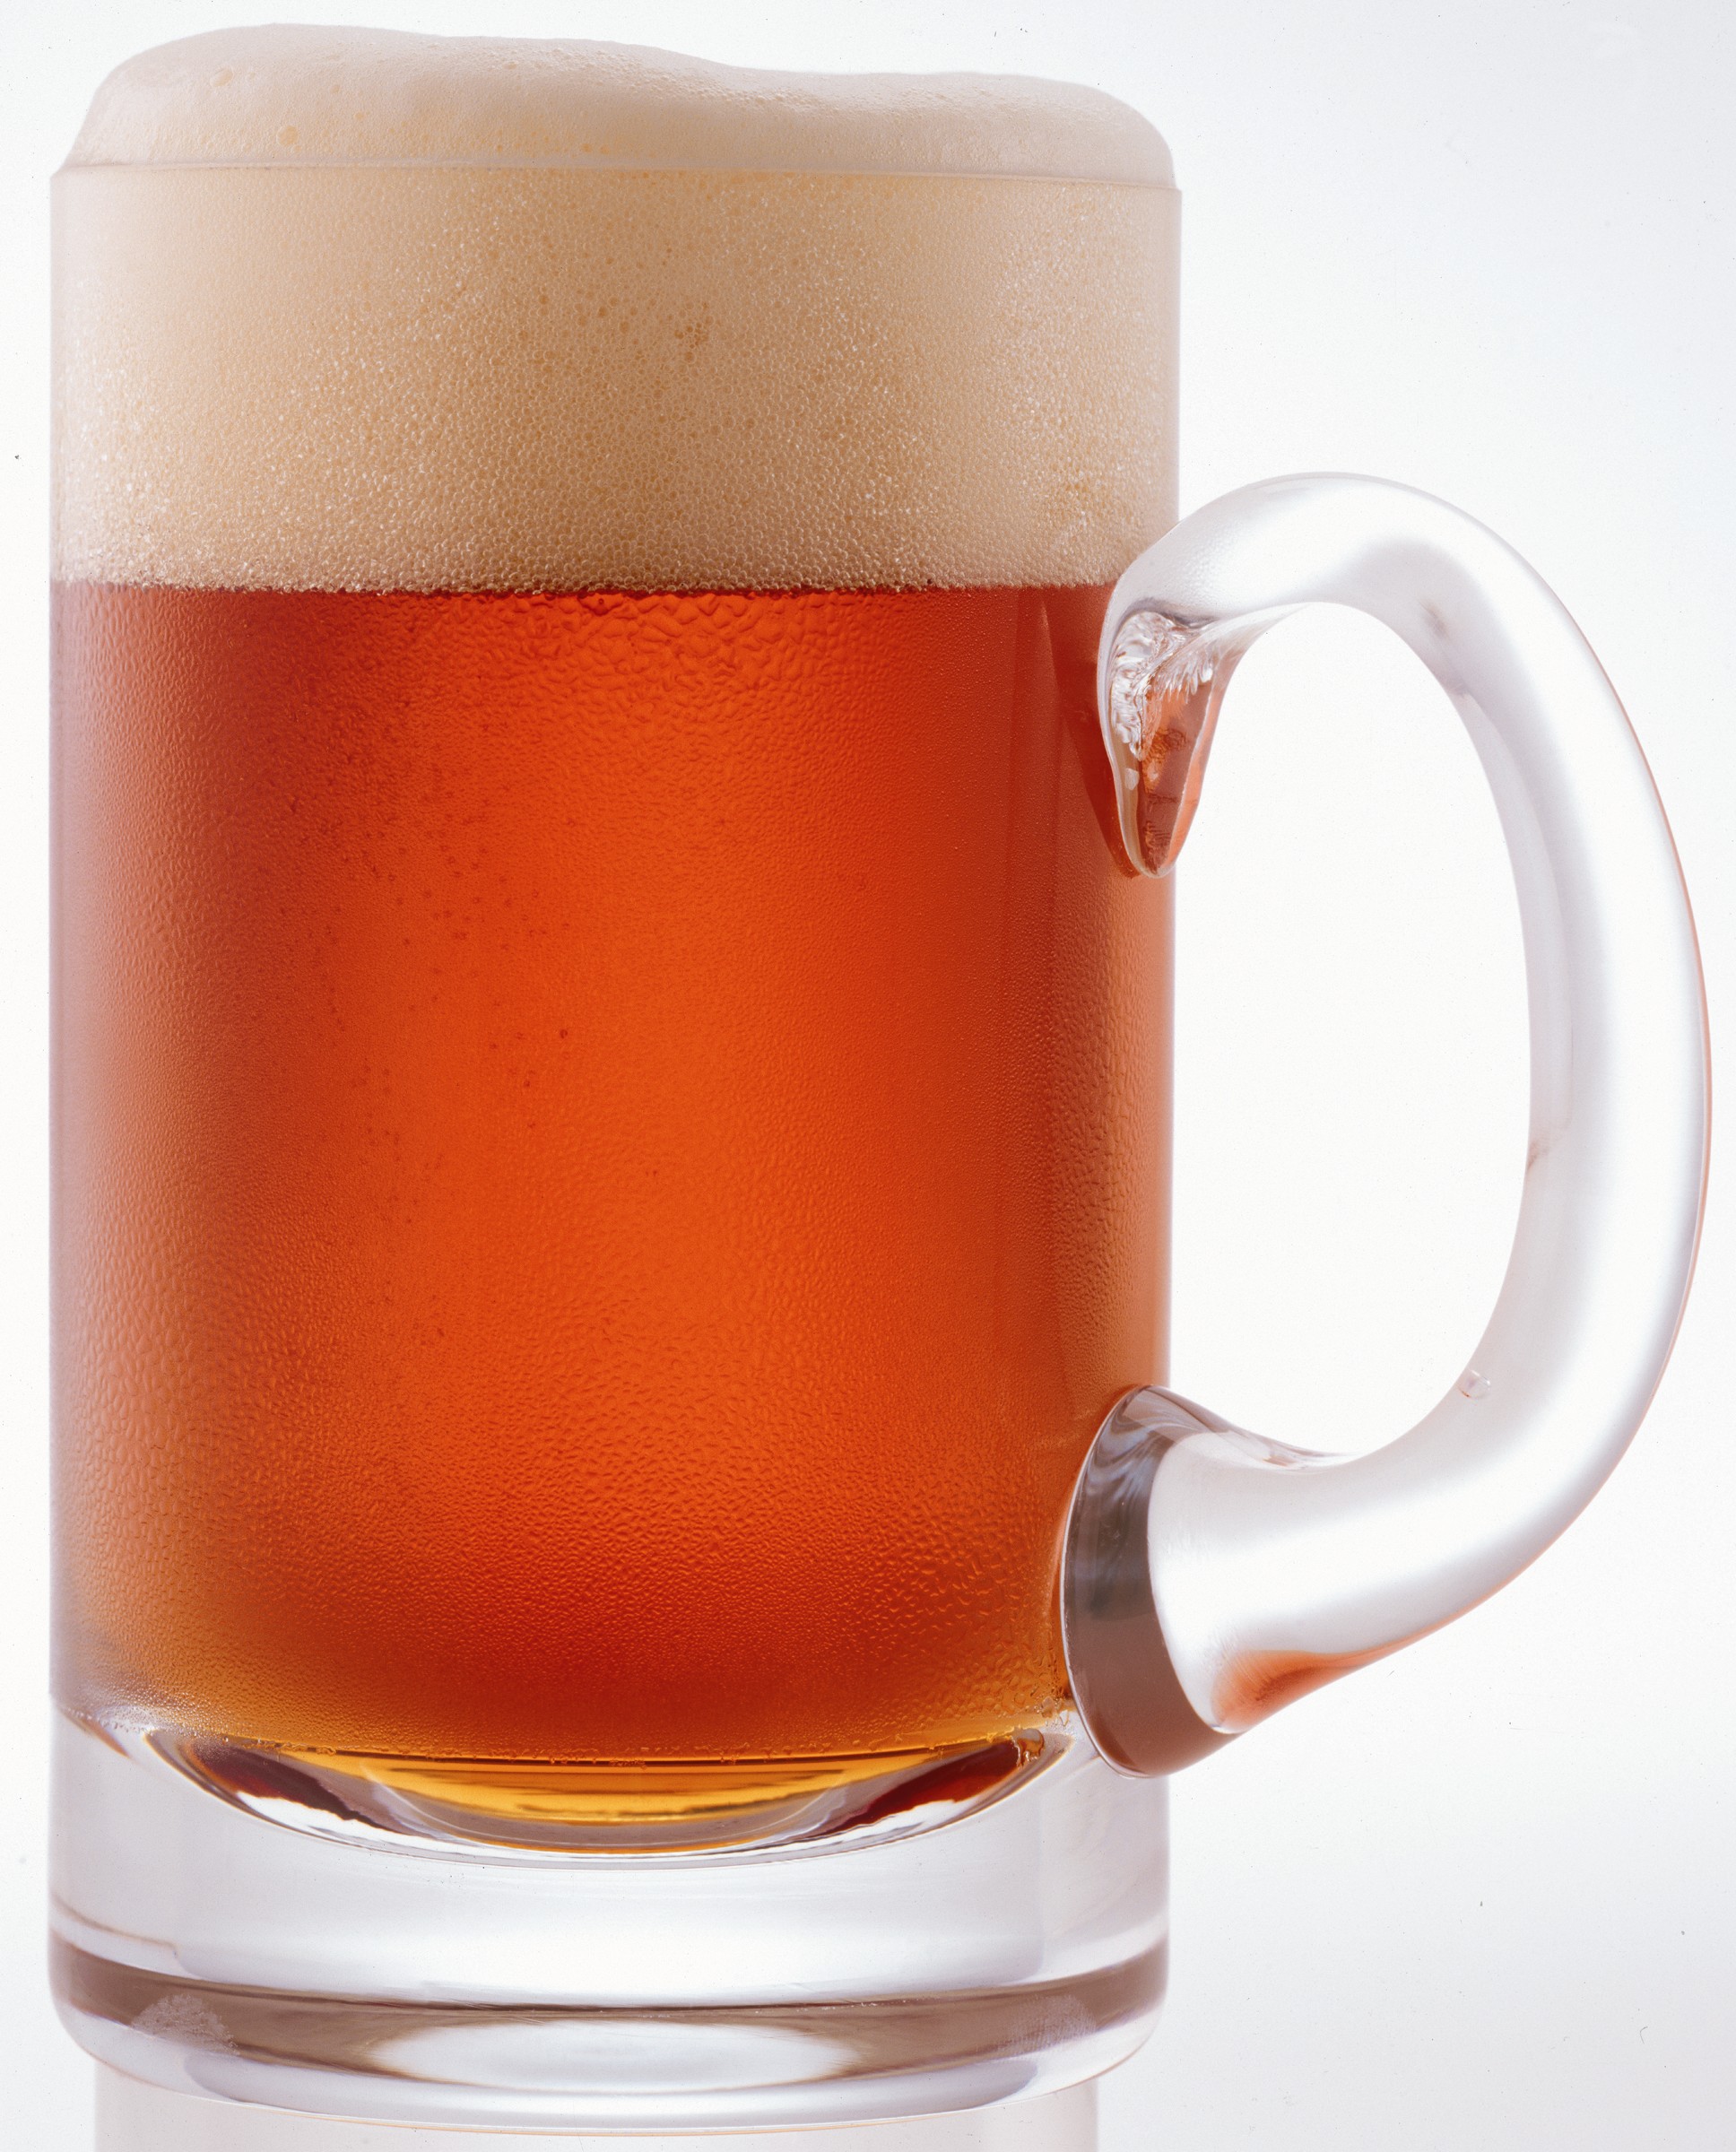 Beer Mug Preference Poll (and a question) | Community | BeerAdvocate